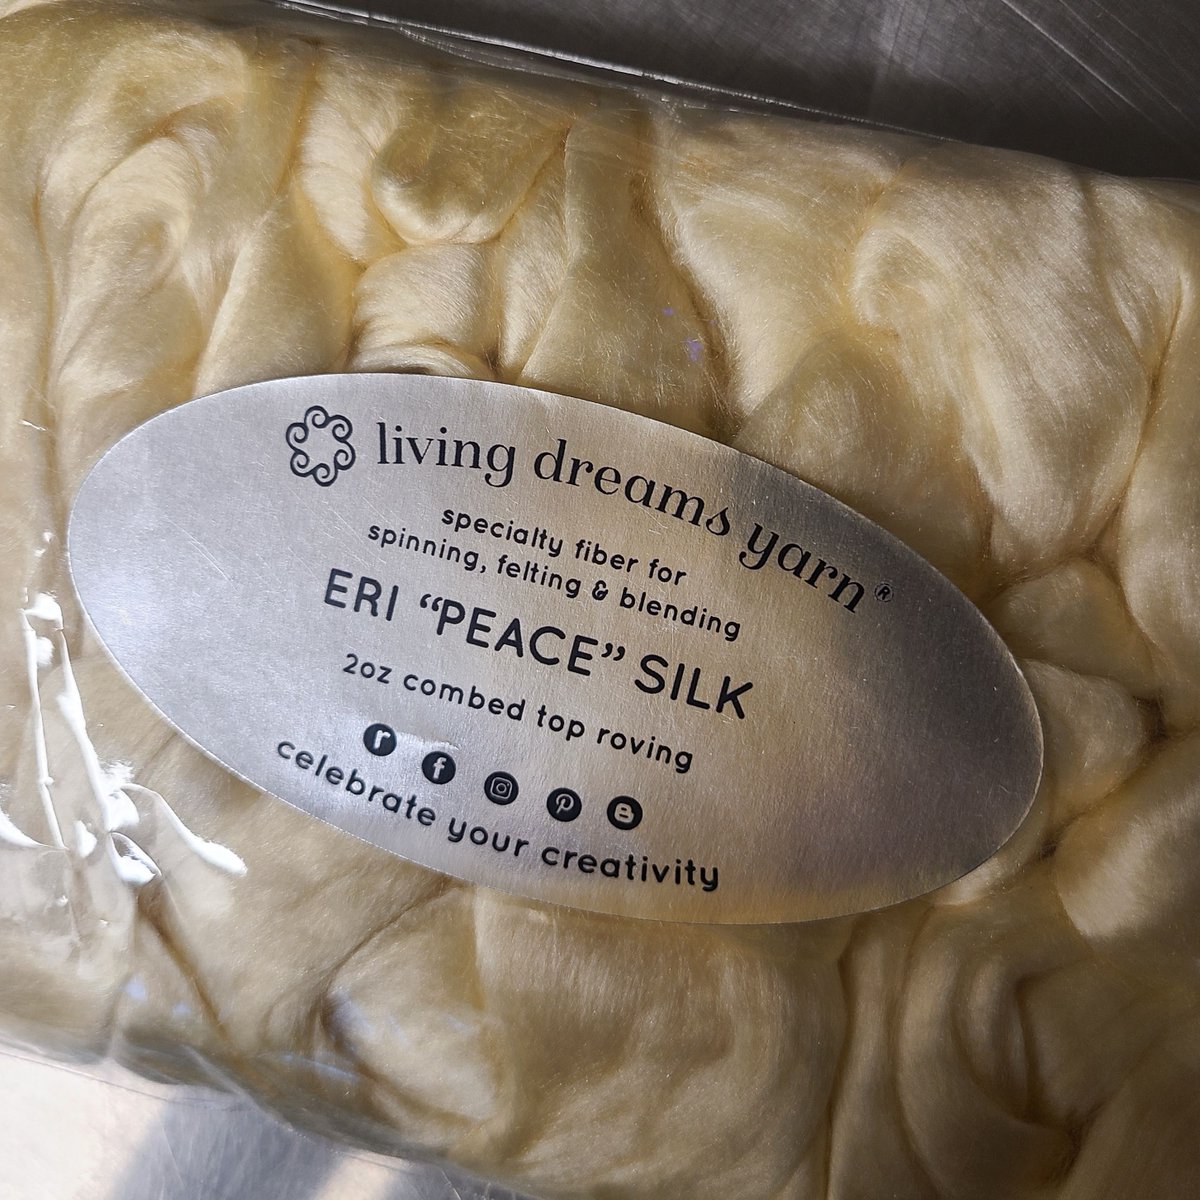 This cruelty free silk goes in our coming soon Euca-Citrus soap! Wait to you feel the lather!! #artisanSoap #handmade #gift #oliveOilSoap #shopLocal #coldProcessSoap #SmallBusiness #skincare #palmFree #shavingSoap #giftforHer   #etsySeller #deltamoonsoap